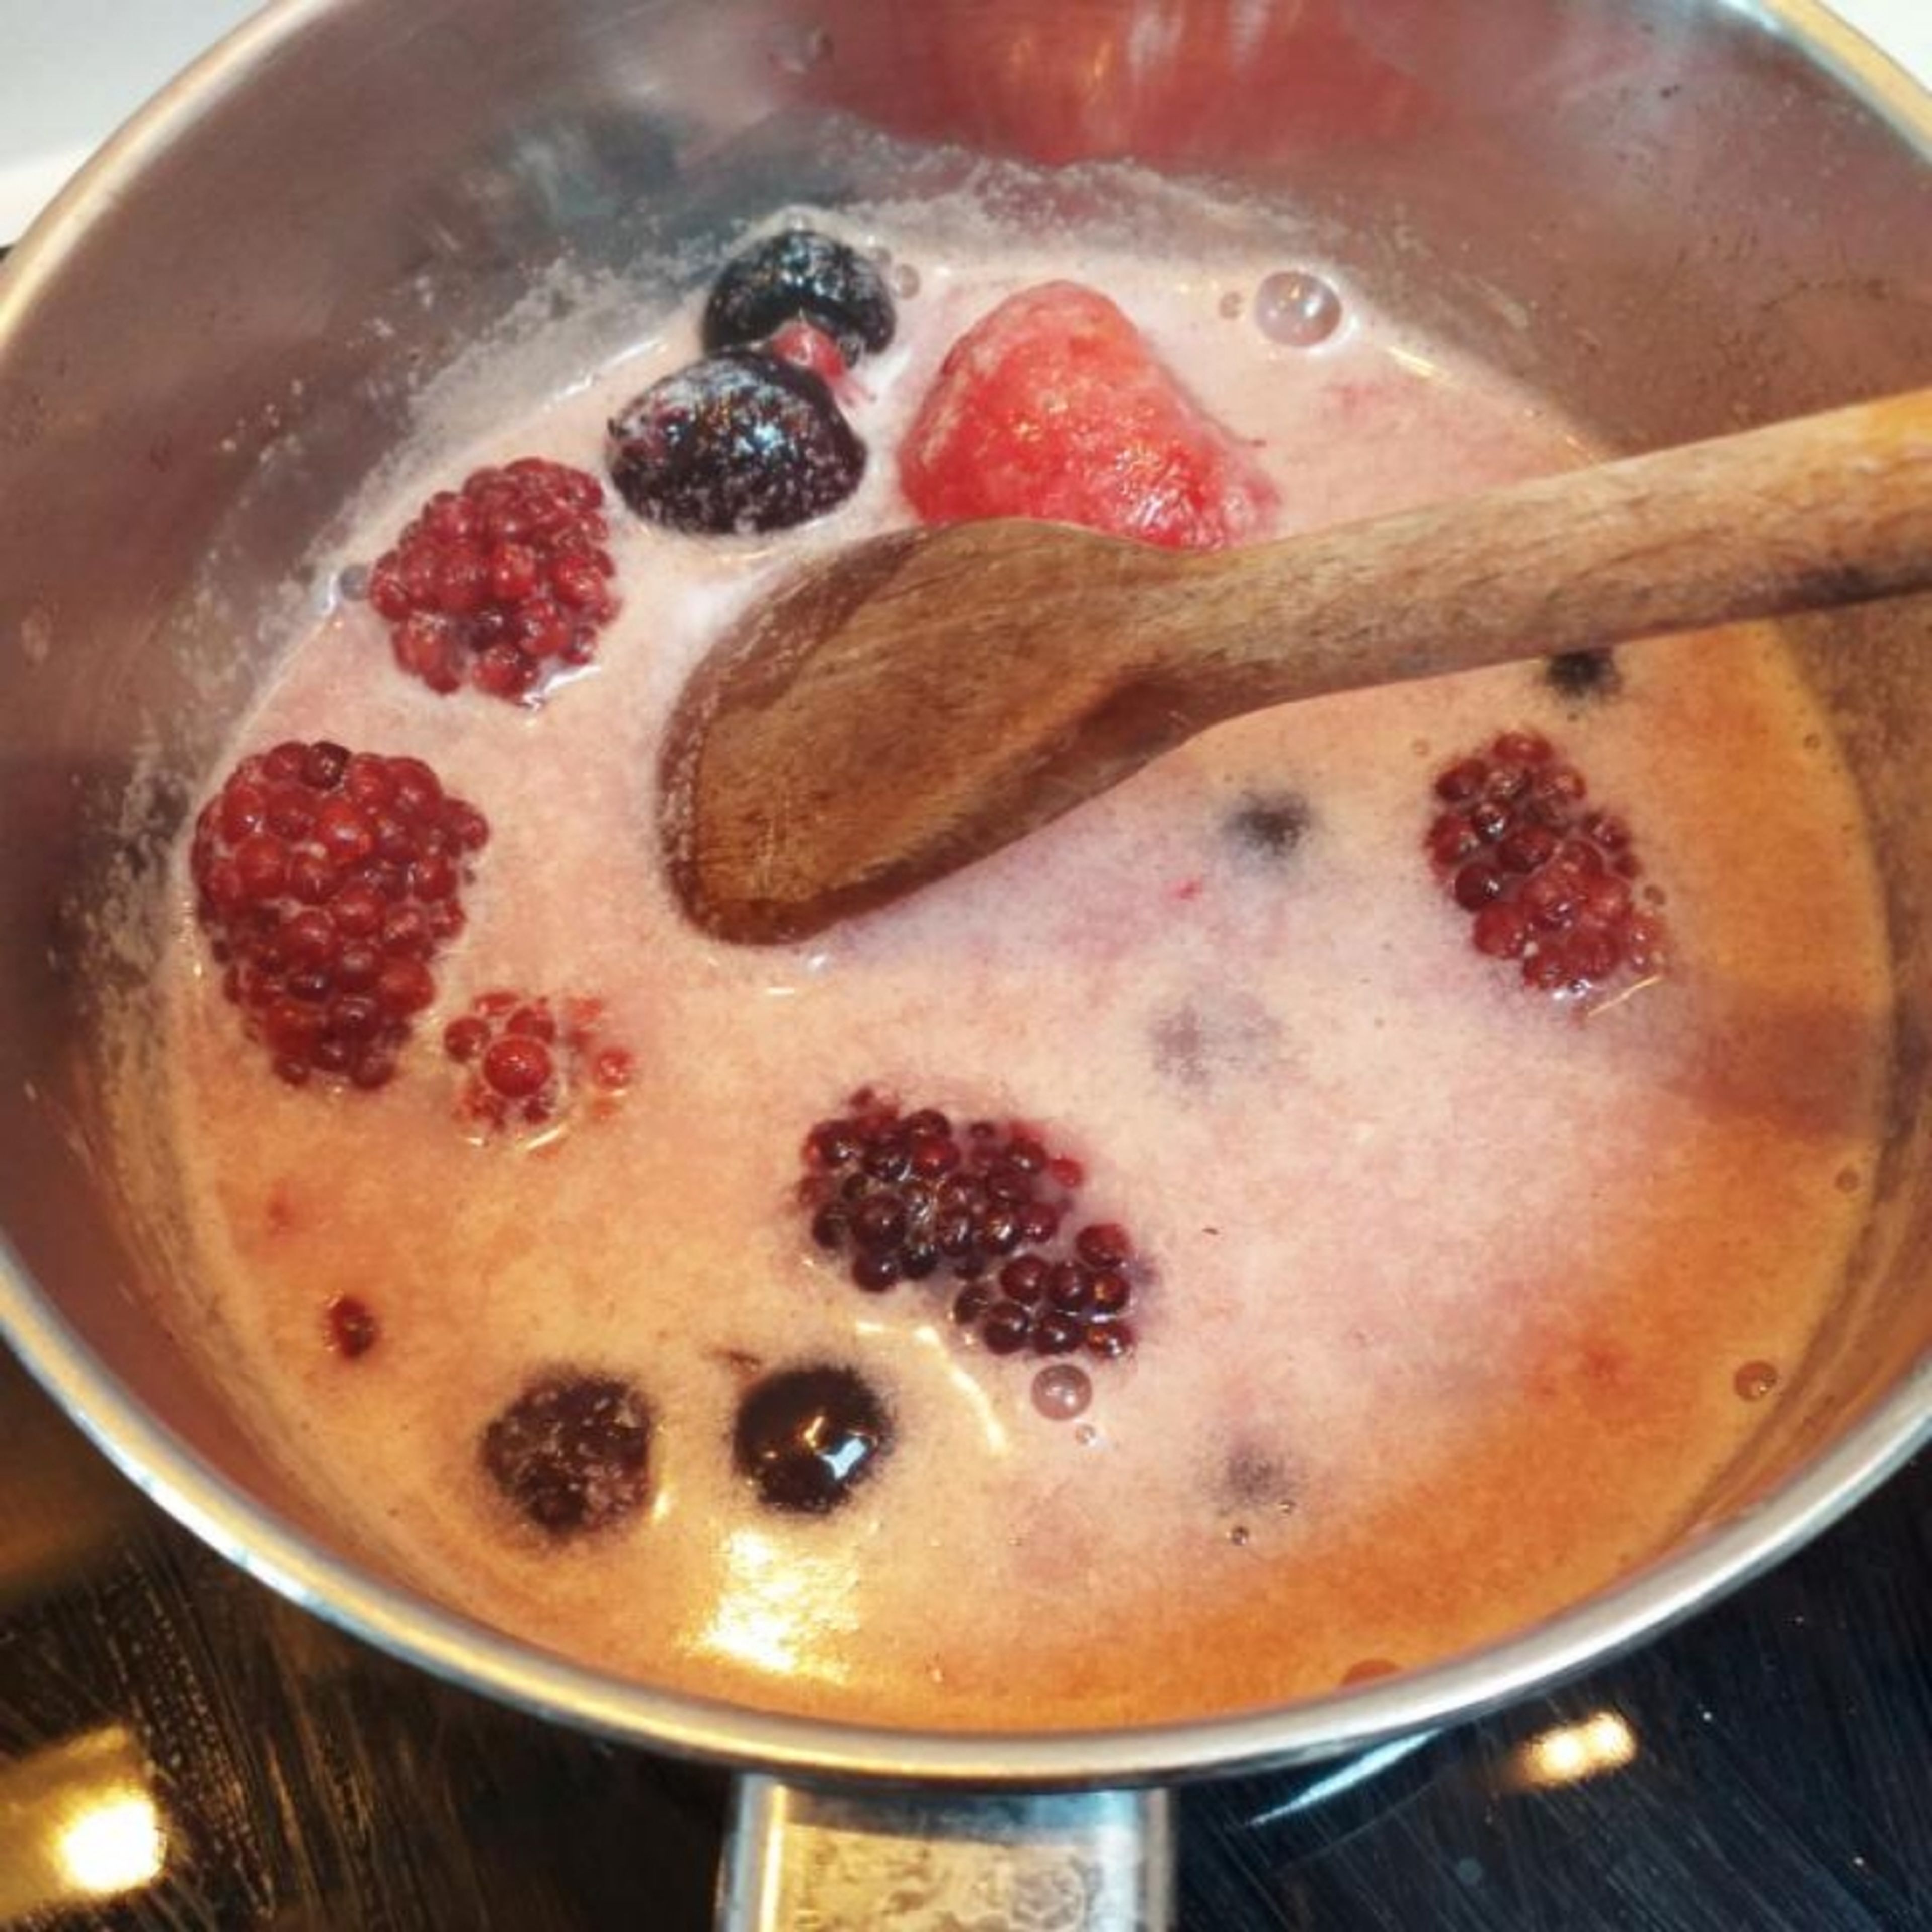 When the milk starts the first boil, remove from the fire and add the mix of berries. Mix it and let it rest.